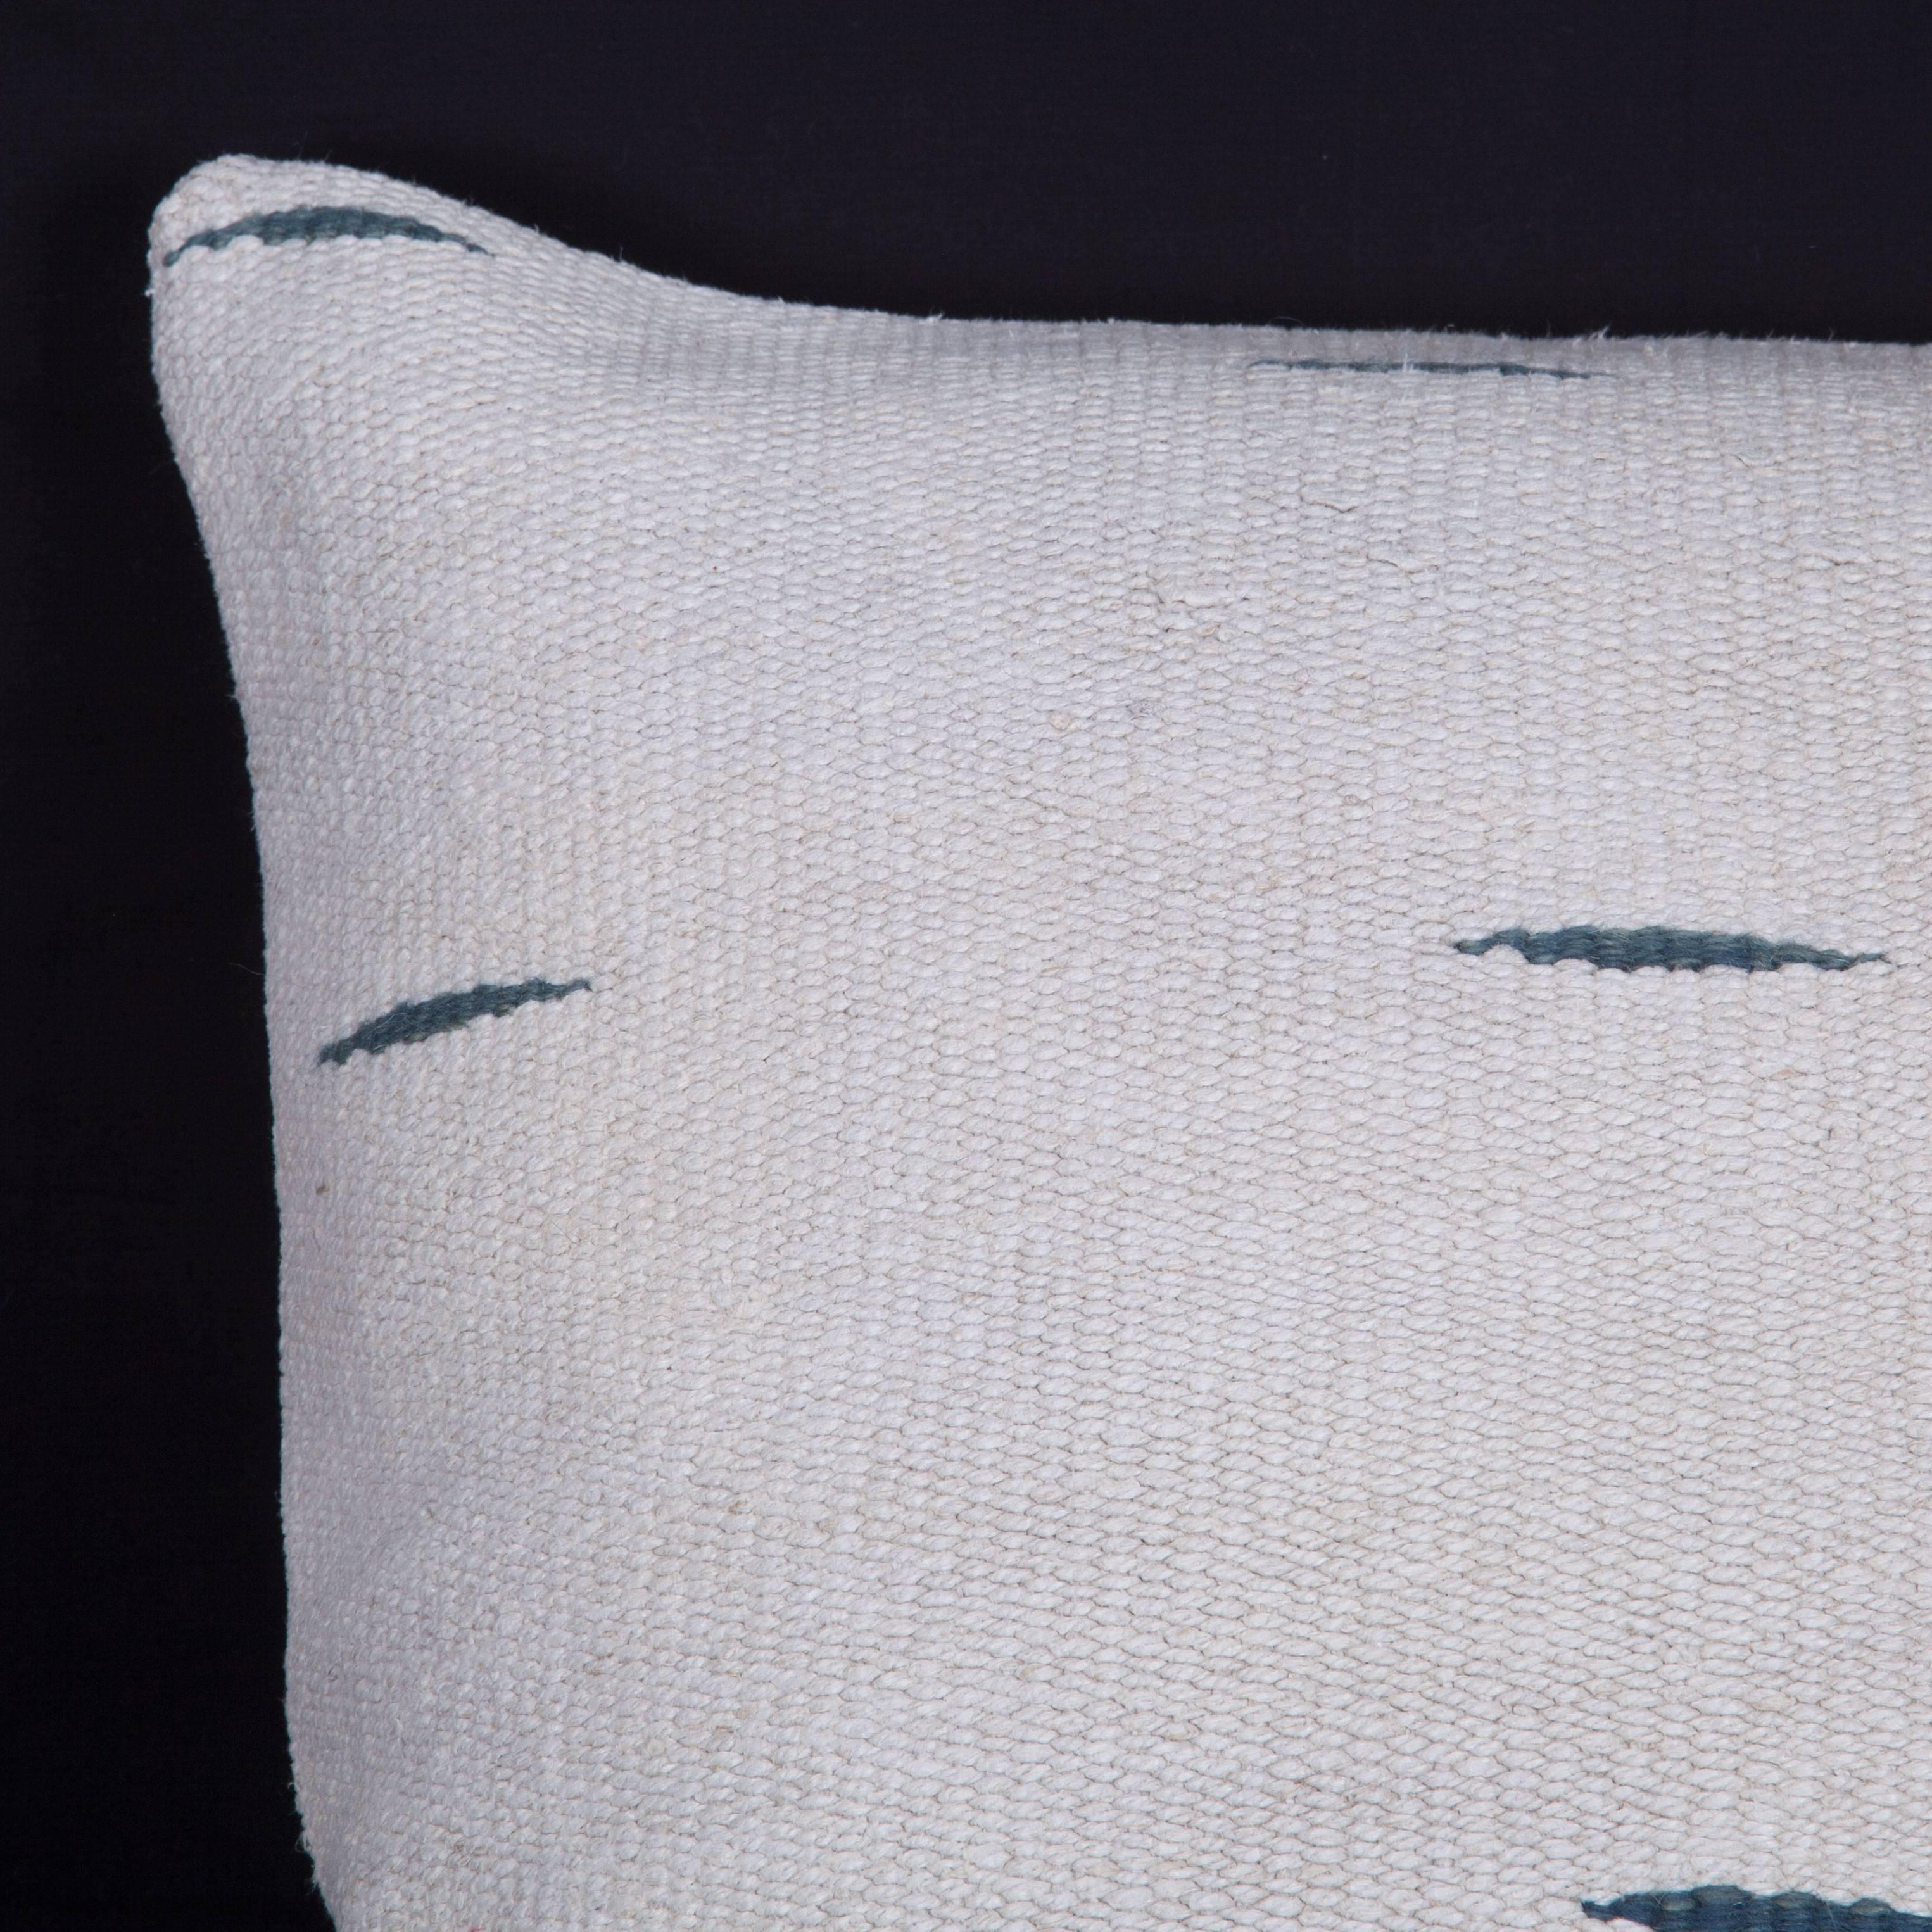 The pillow is made out of mid-20th century, Anatolian Hemp Kilim. It does not come with an insert but it comes with a bag made to the size and out of cotton to accommodate the filling. The backing is made of cotton. Please note 'filling is not